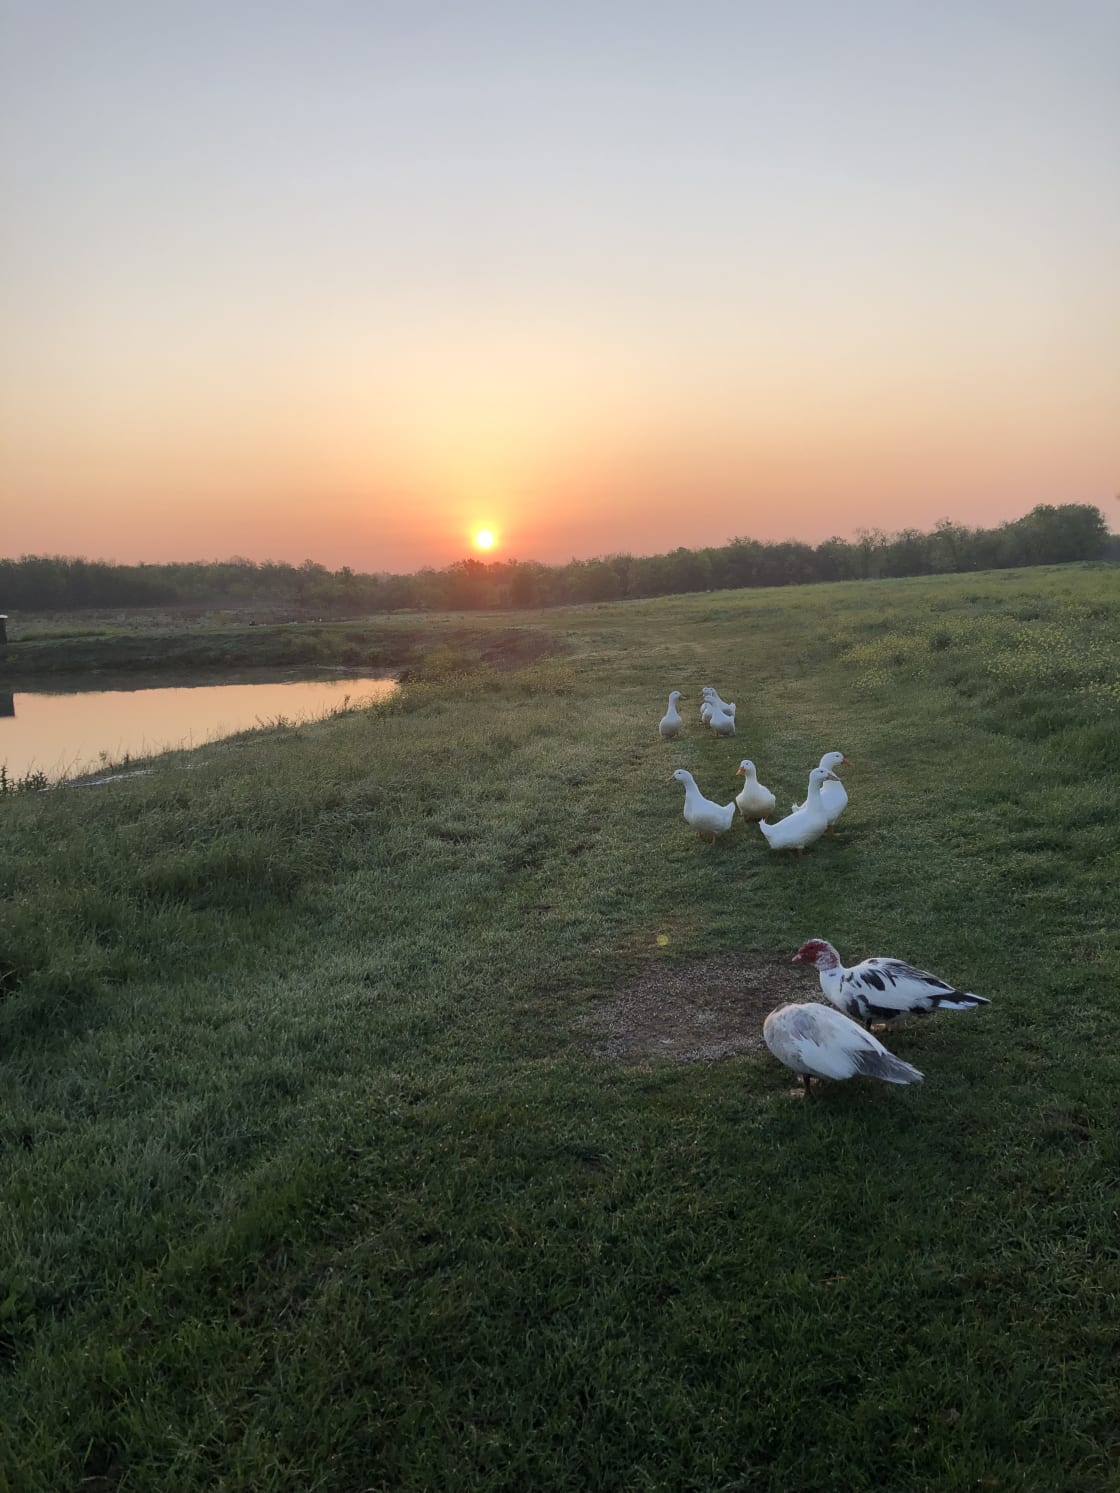 Sunrise at the campsite and our ducks.